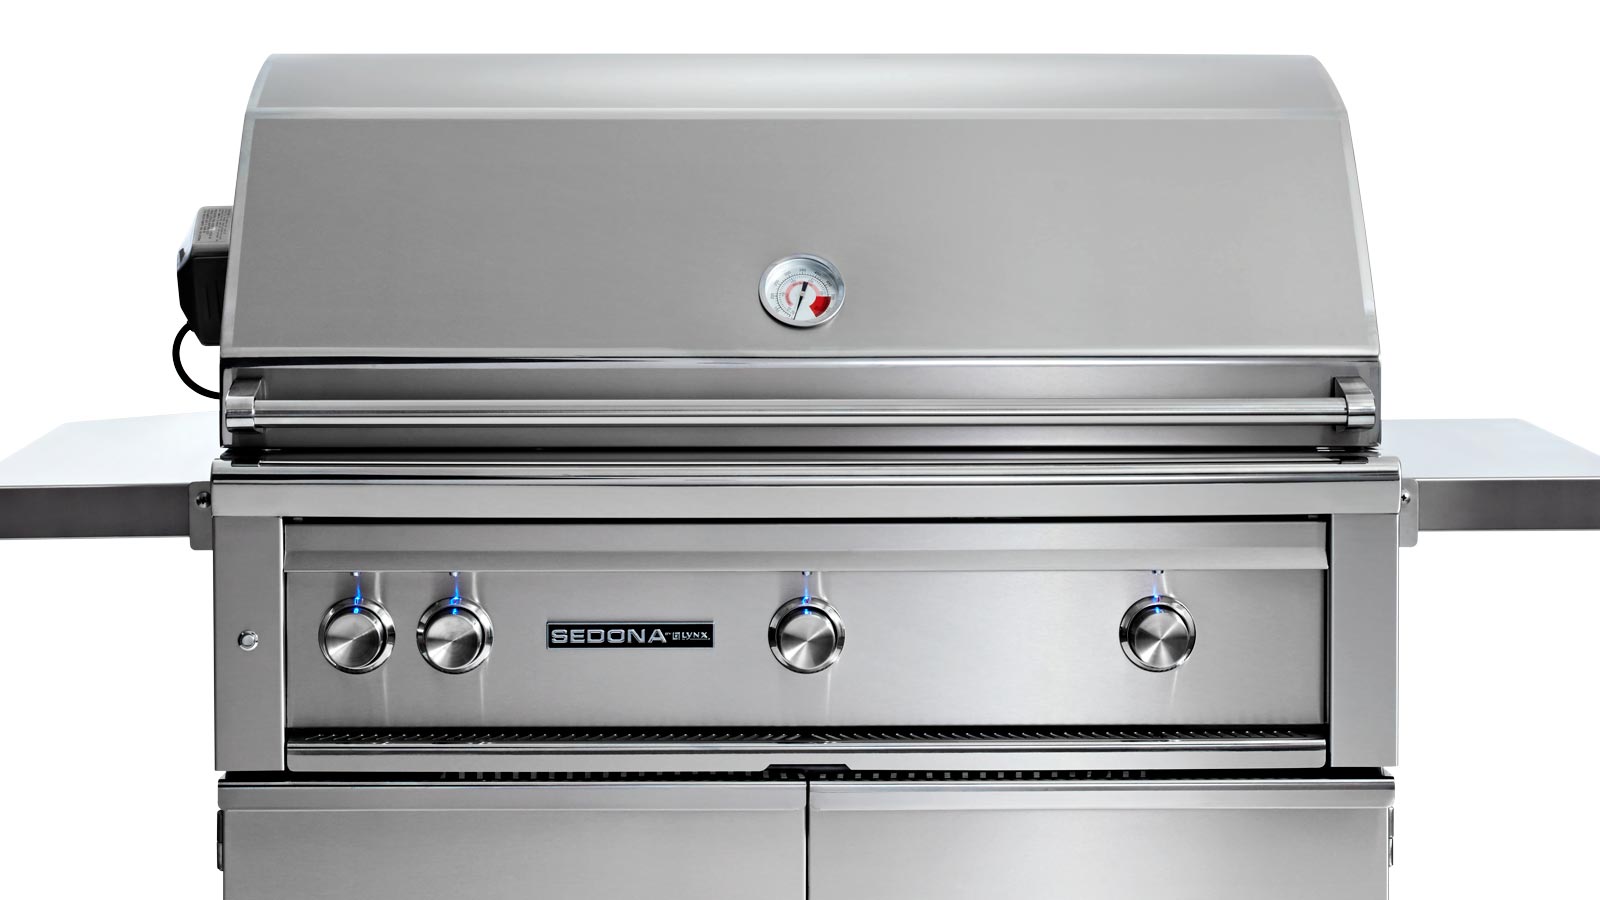 42" Freestanding Grill with 3 Stainless Steel Burners and Rotisserie (L700FR)